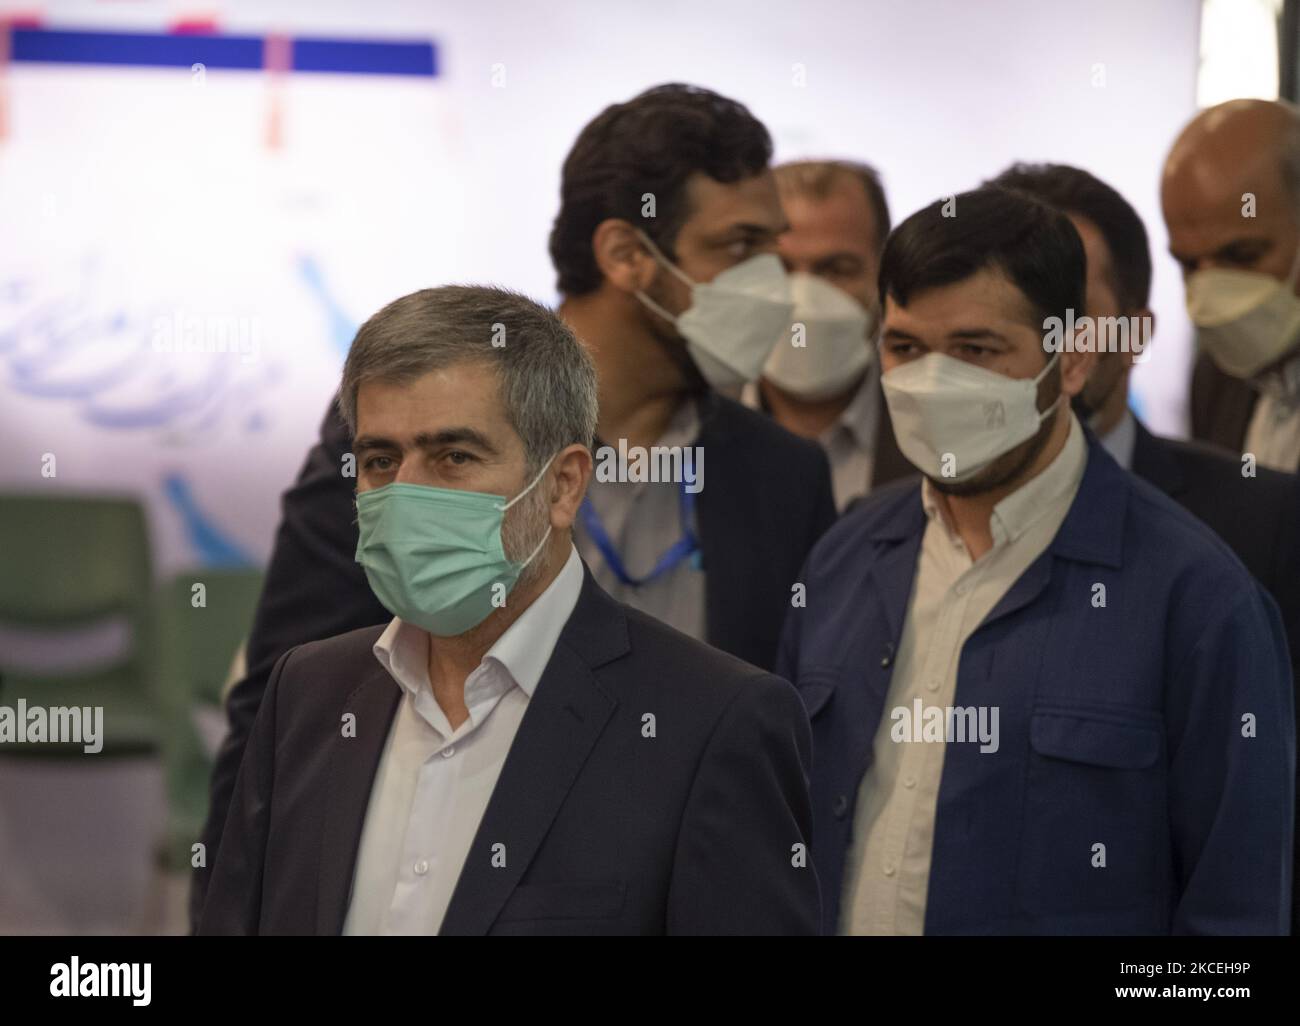 Fereydoon Abbasi (L), former Head of Iran’s Atomic Energy Organization (IAEA) attends the Interior Ministry building to register as Iran’s 2021 presidential elections candidate in central Tehran on May 14, 2021. (Photo by Morteza Nikoubazl/NurPhoto) Stock Photo